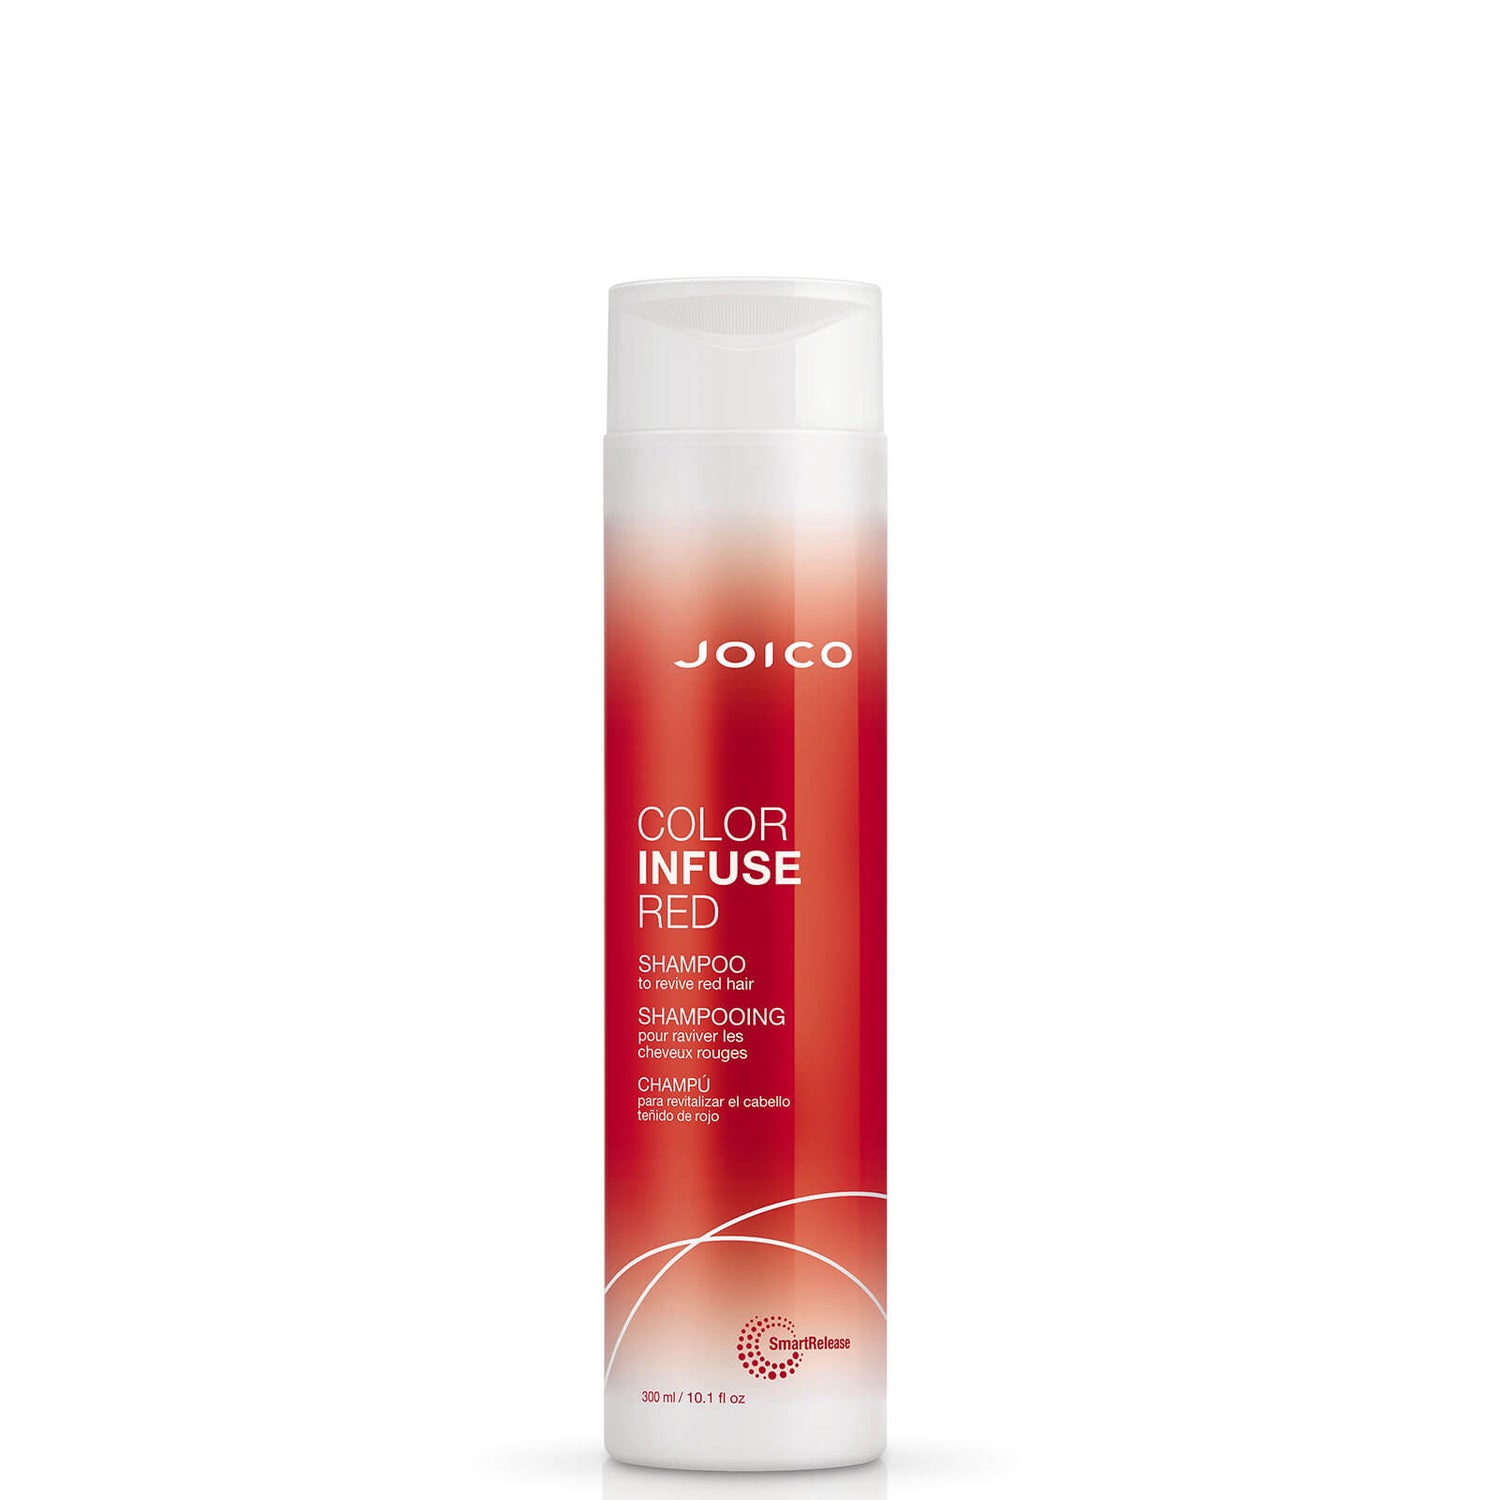 Shampooing Color Infuse Red Joico 300 ml